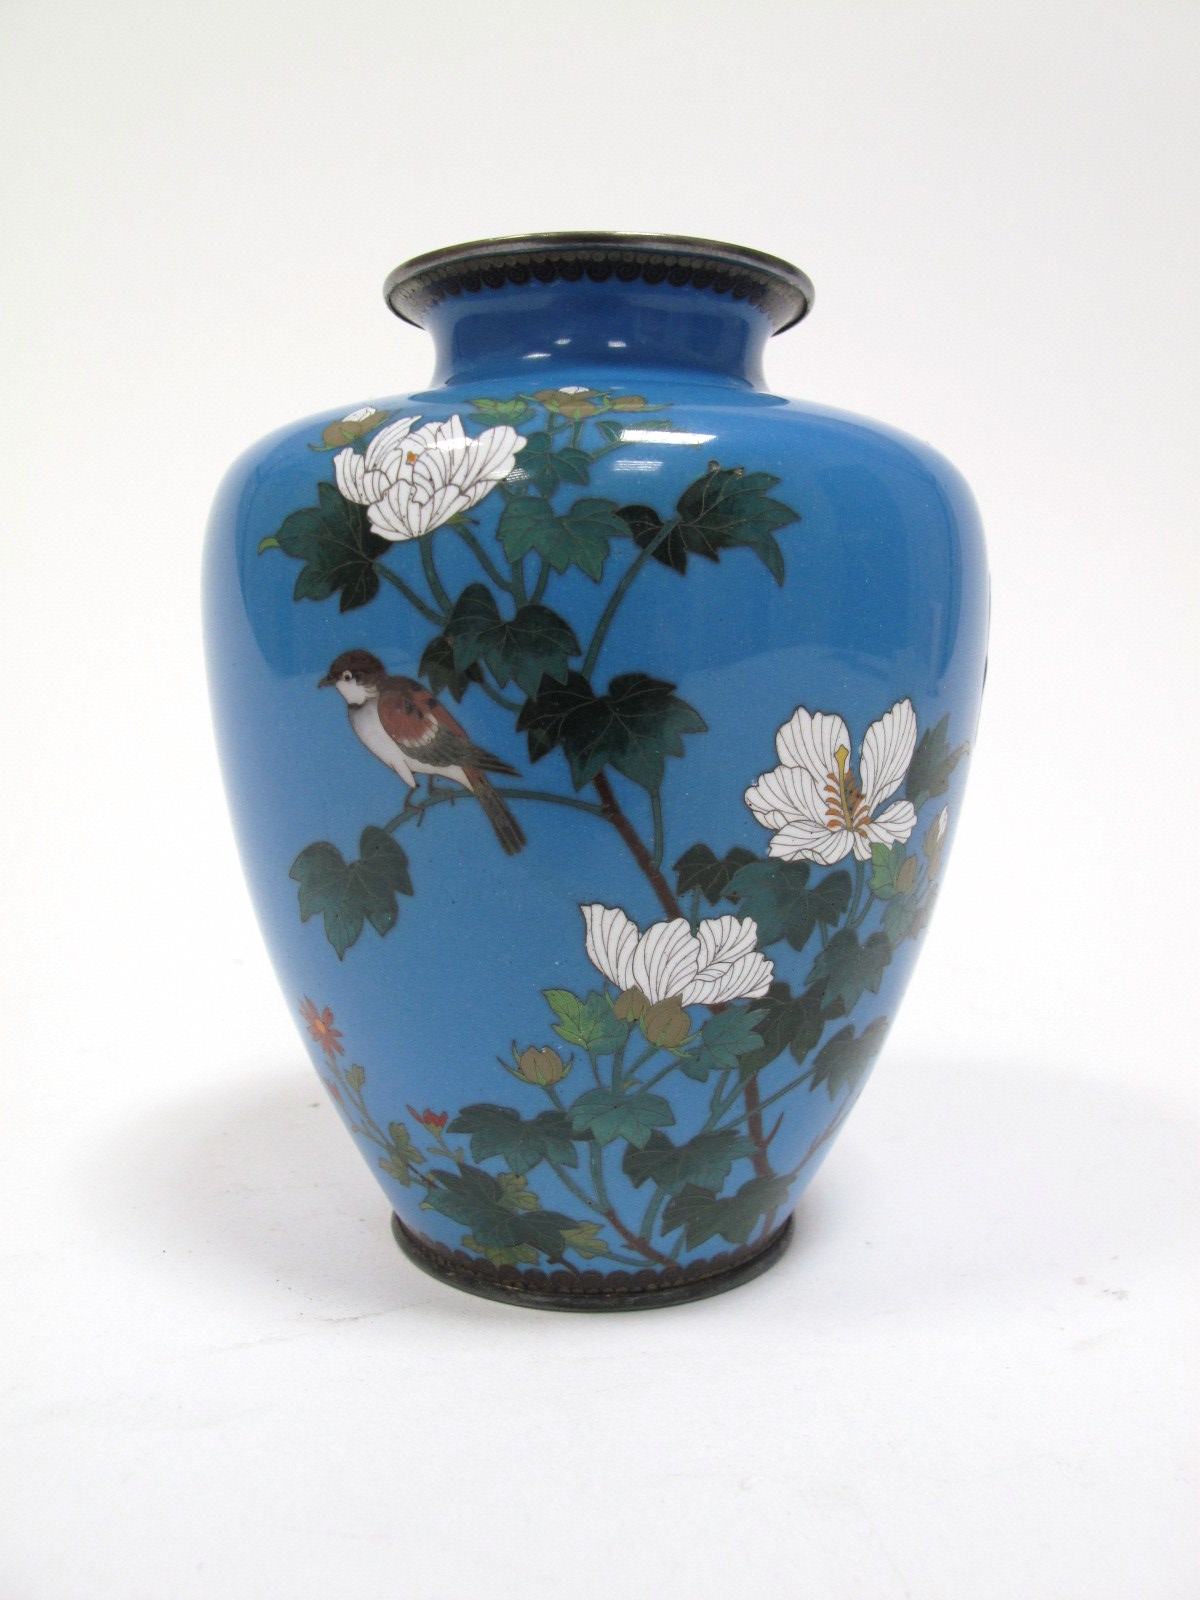 An Early XX Century Japanese Cloisonné Baluster Vase, decorated with birds amongst flowering plants,